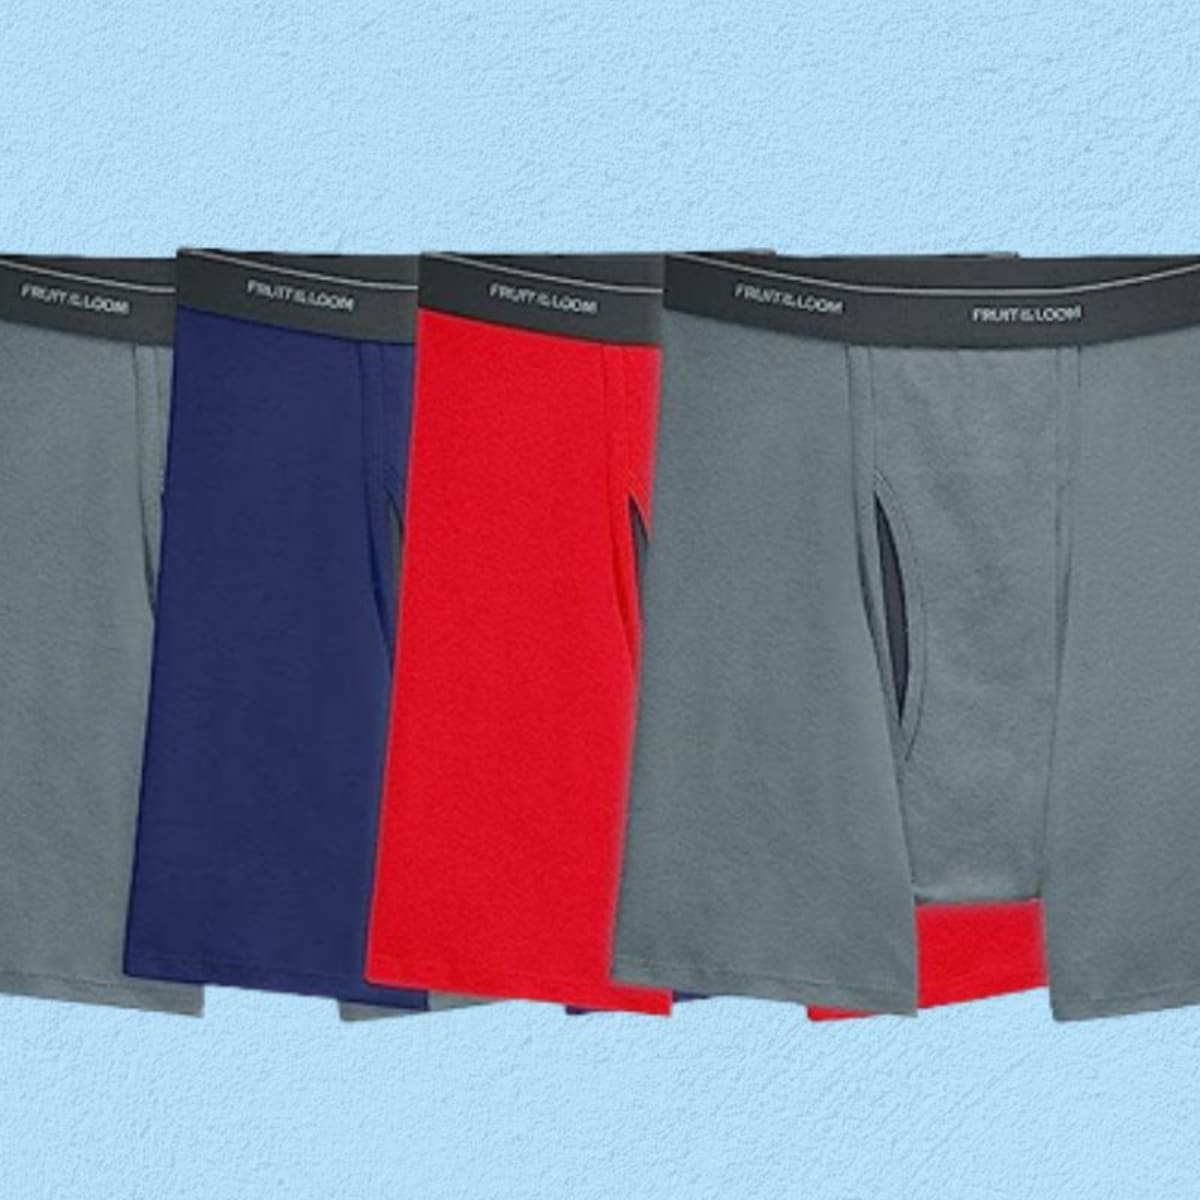 Bestselling Boxer Briefs Are on Sale for $2.21 Each - Men's Journal